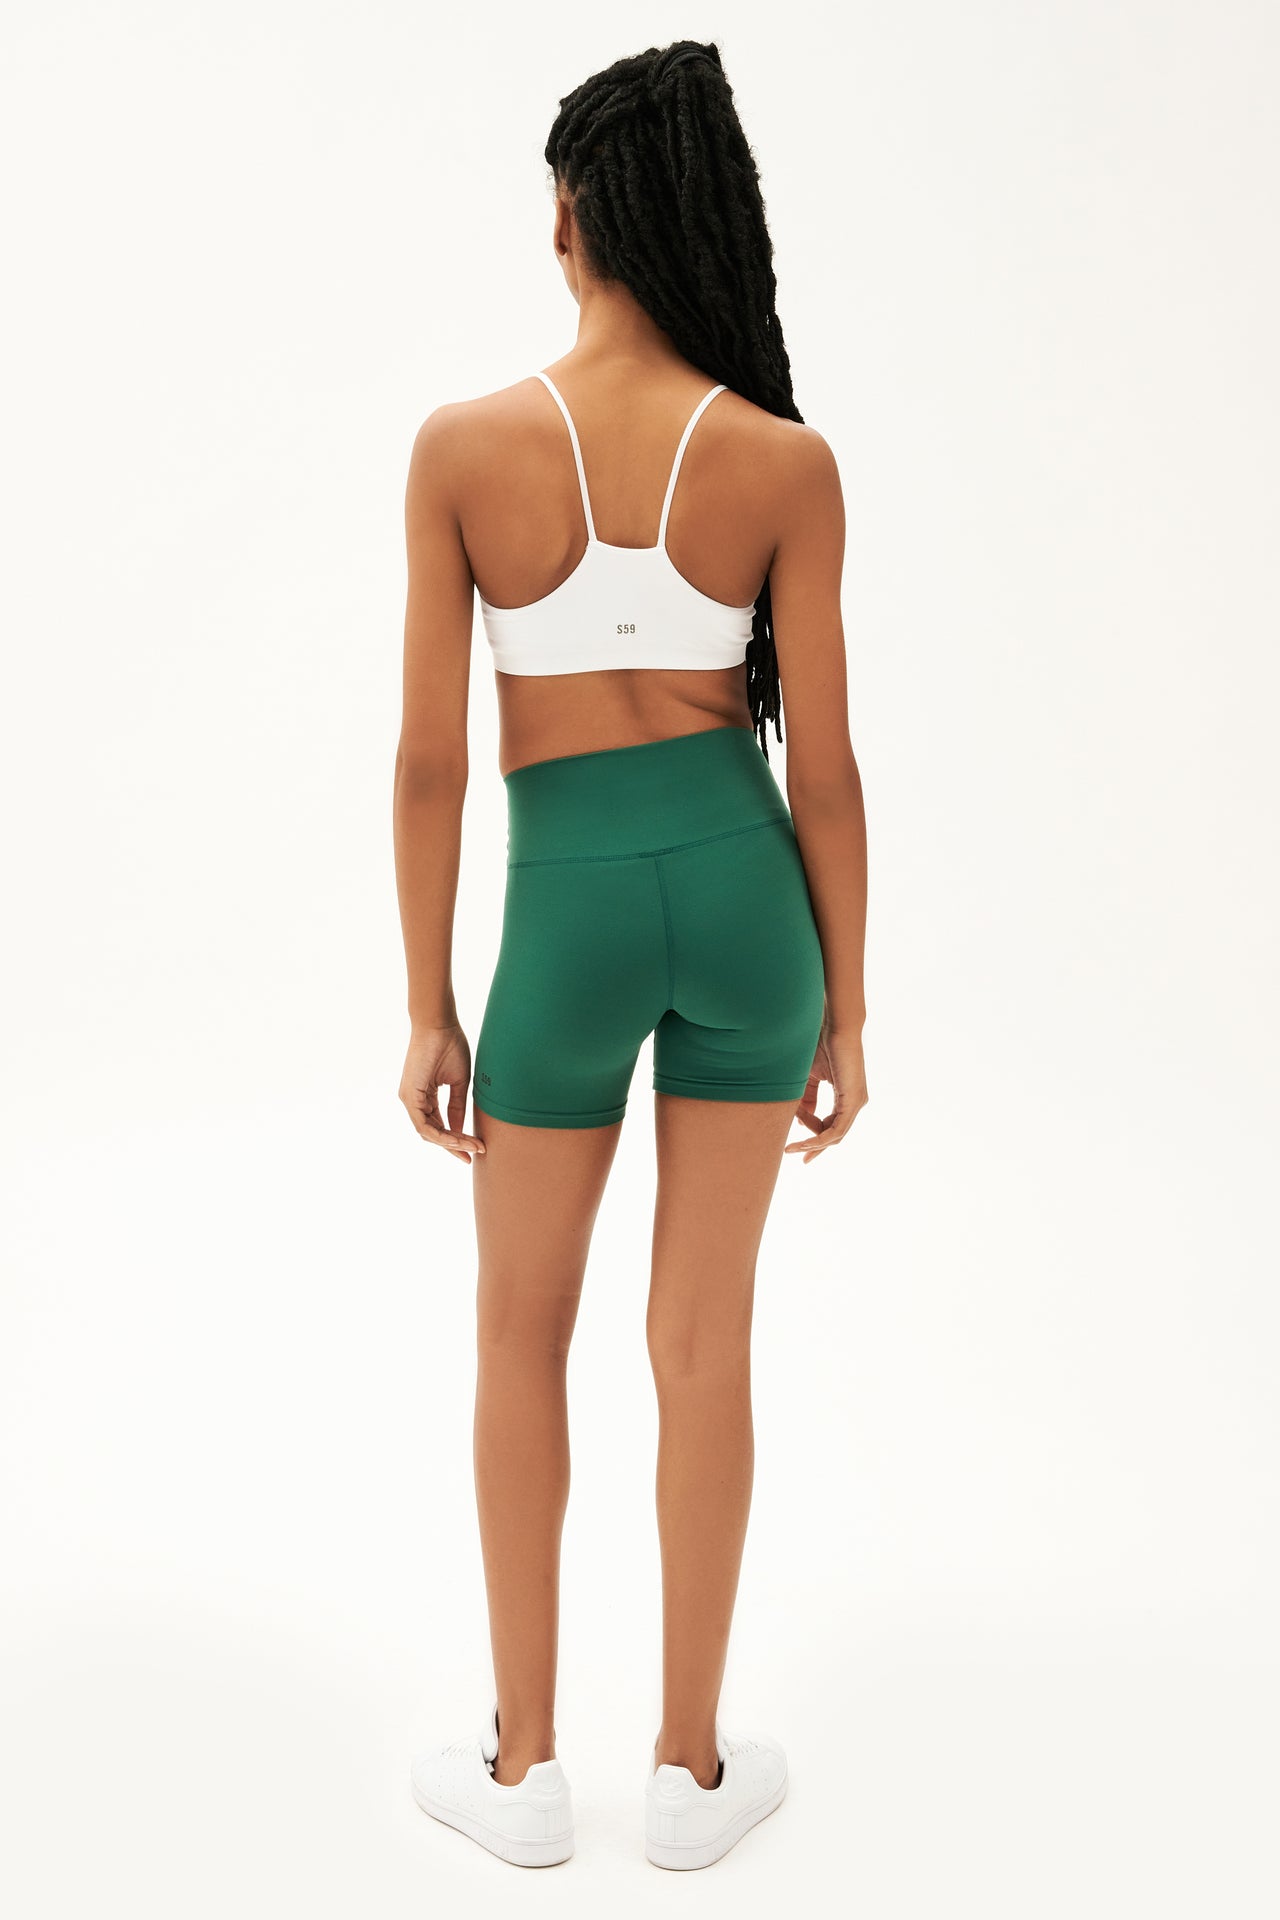 Full back view of girl wearing highwaisted mid thigh green bike shorts with white sports bra and white shoes